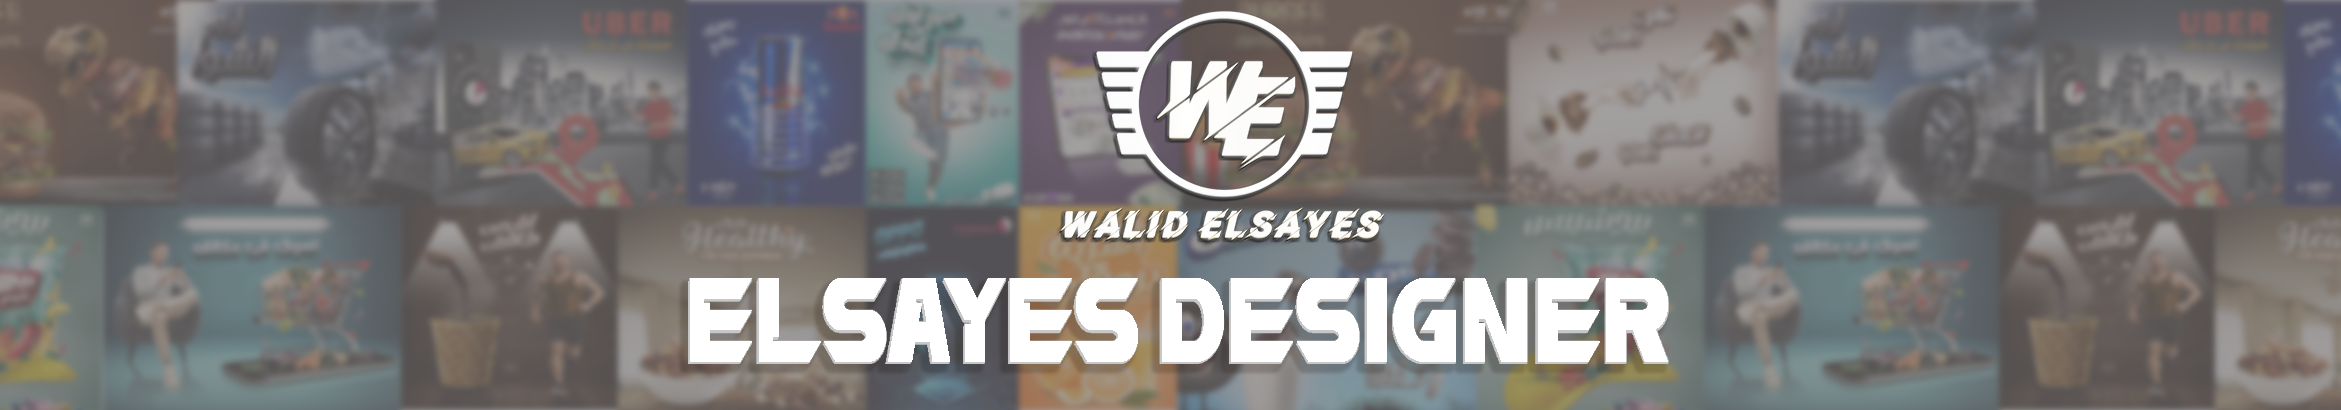 Walid Elsayes's profile banner